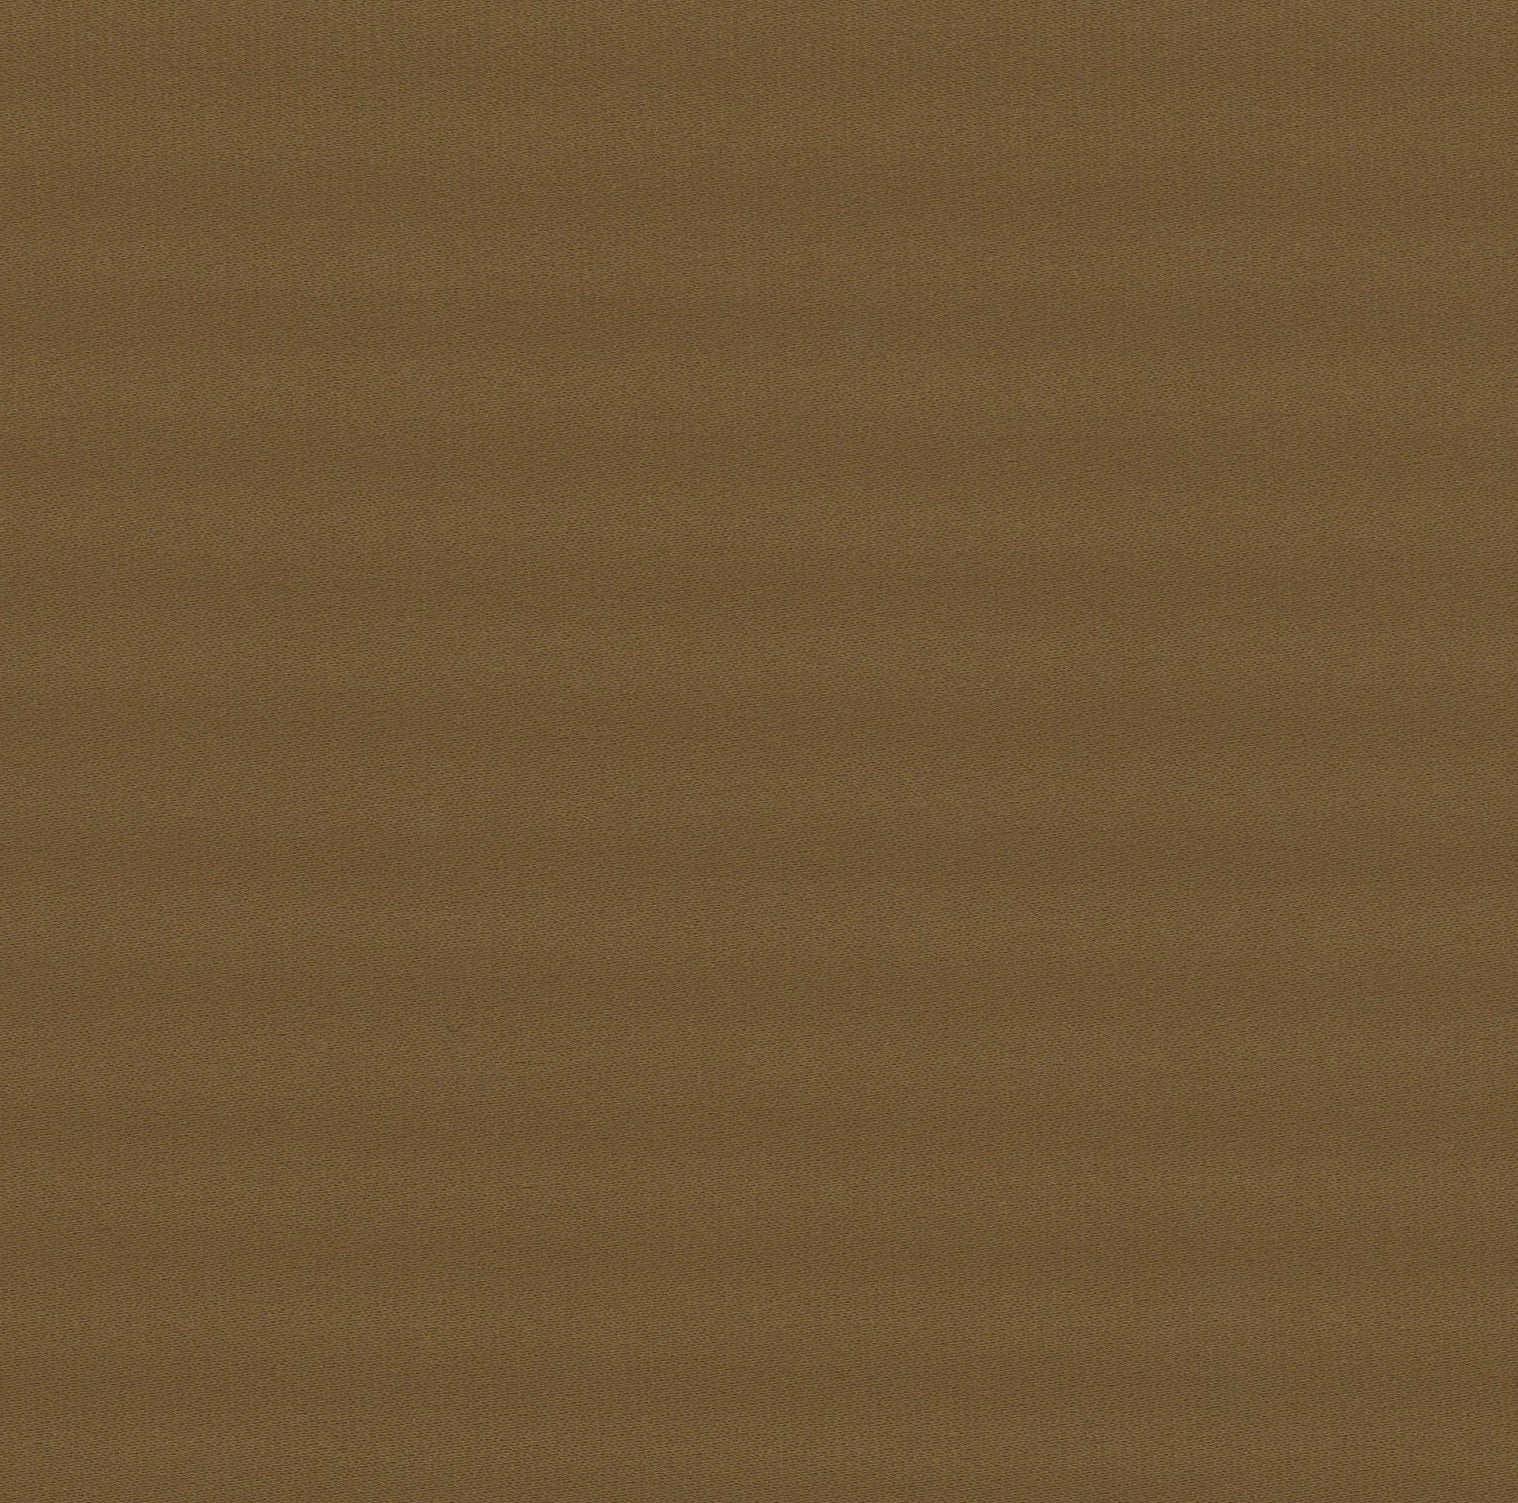 36033-08 Brown Polyester Plain Dyed 233g/yd 56&quot; brown plain dyed polyester woven Solid Color - knit fabric - woven fabric - fabric company - fabric wholesale - fabric b2b - fabric factory - high quality fabric - hong kong fabric - fabric hk - acetate fabric - cotton fabric - linen fabric - metallic fabric - nylon fabric - polyester fabric - spandex fabric - chun wing hing - cwh hk - fabric worldwide ship - 針織布 - 梳織布 - 布料公司- 布料批發 - 香港布料 - 秦榮興